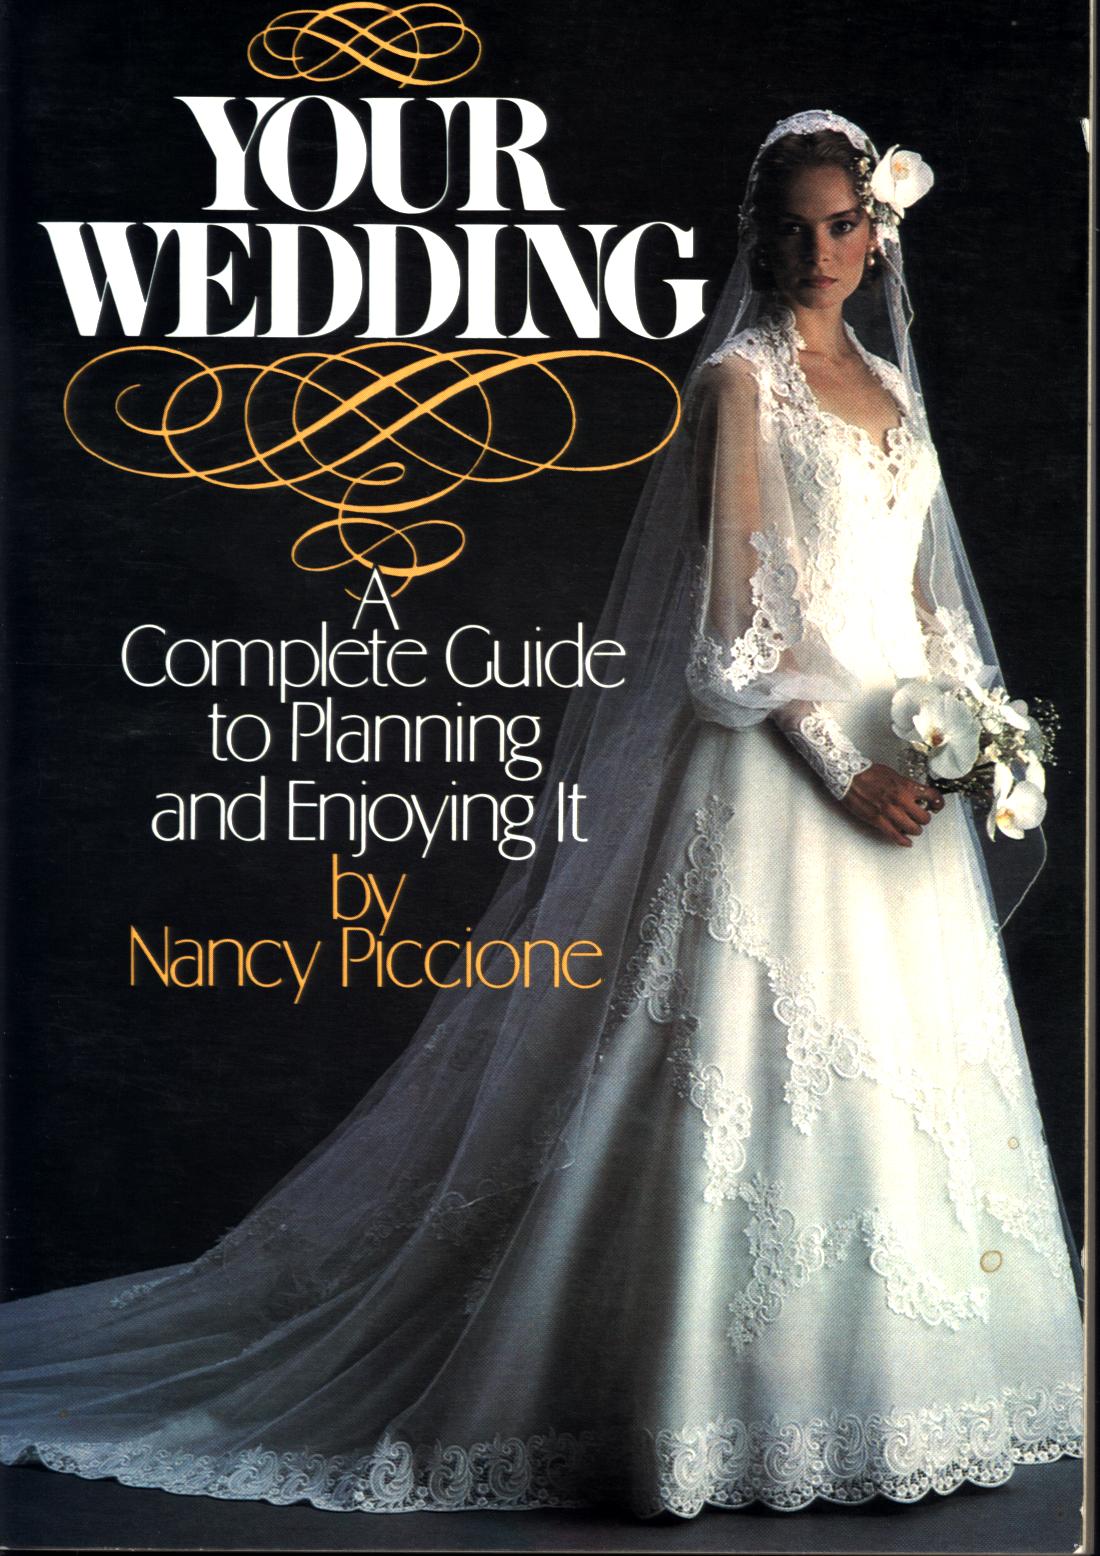 YOUR WEDDING: a complete guide to planning and enjoying it.